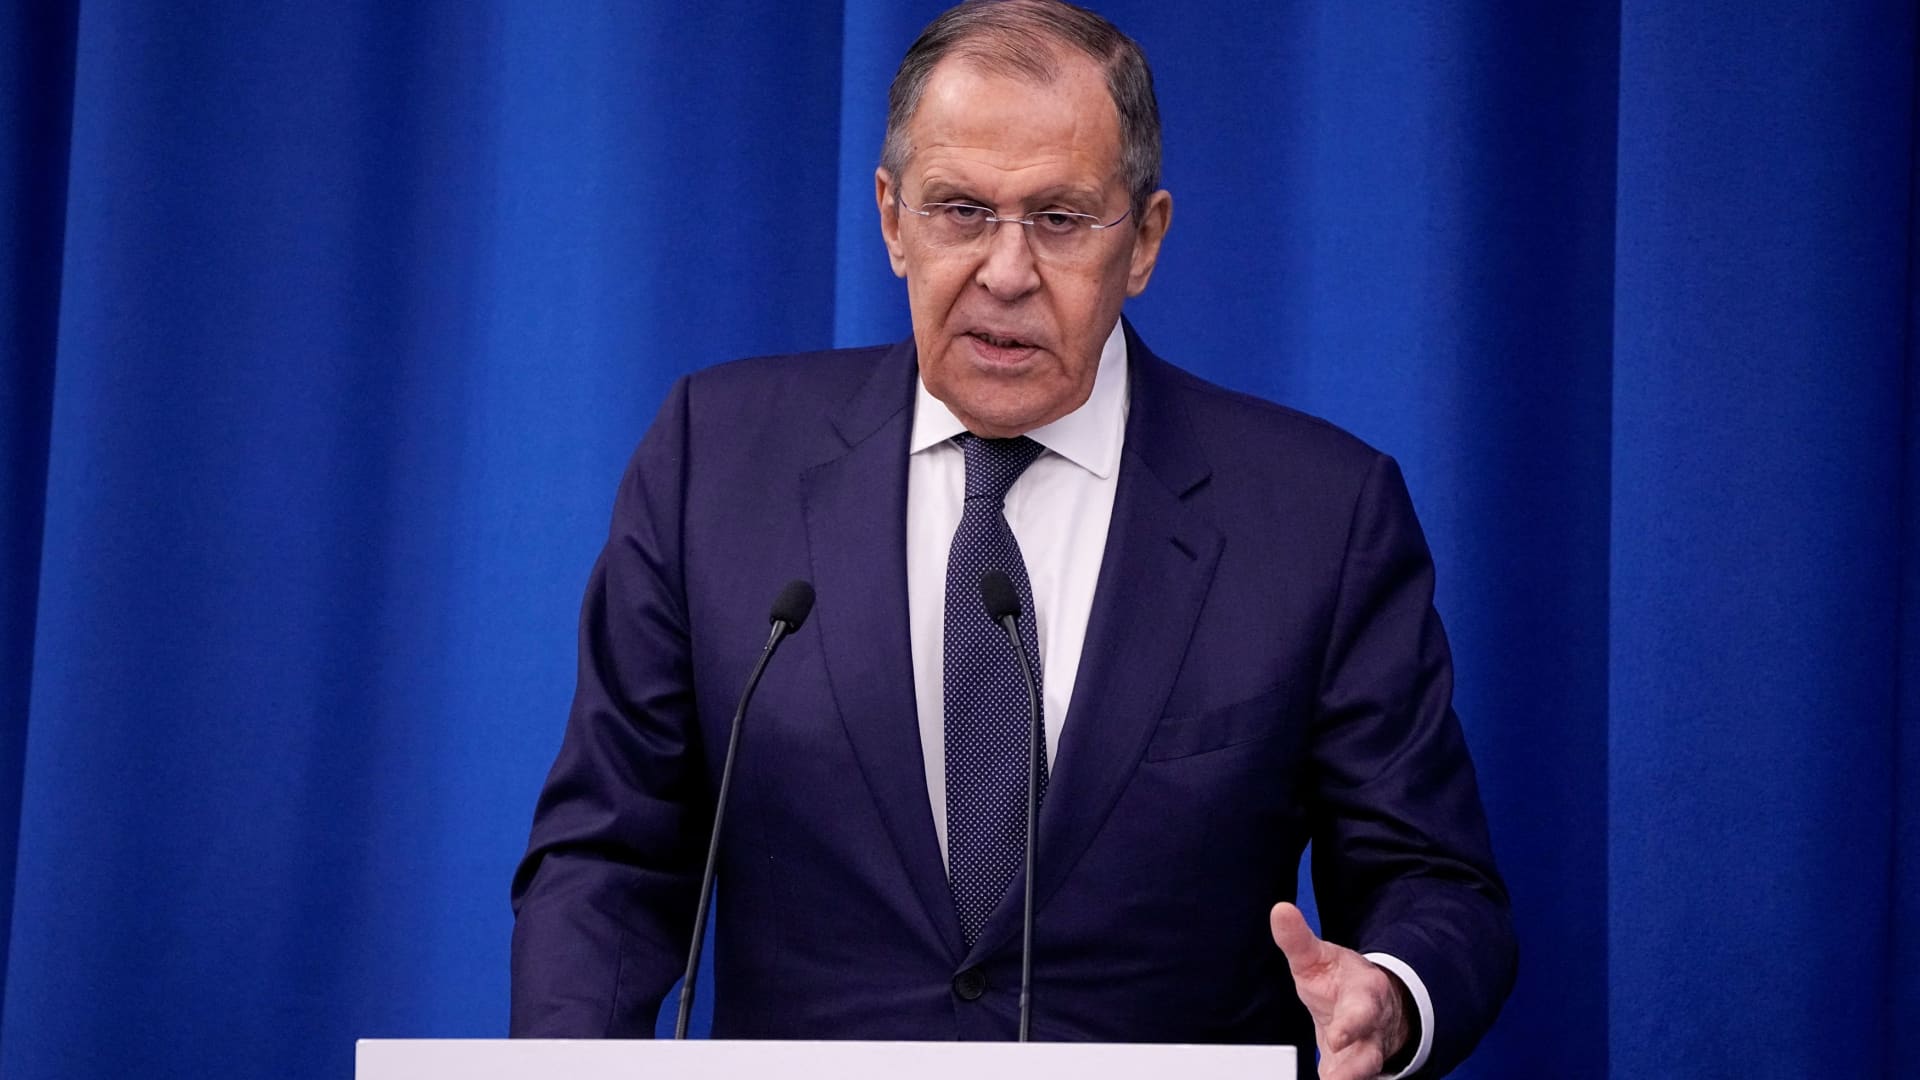 Russian Foreign Minister Sergei Lavrov said everyone wants the conflict in Ukraine to end, but what matters to Russia is the outcome of the war, not the duration.